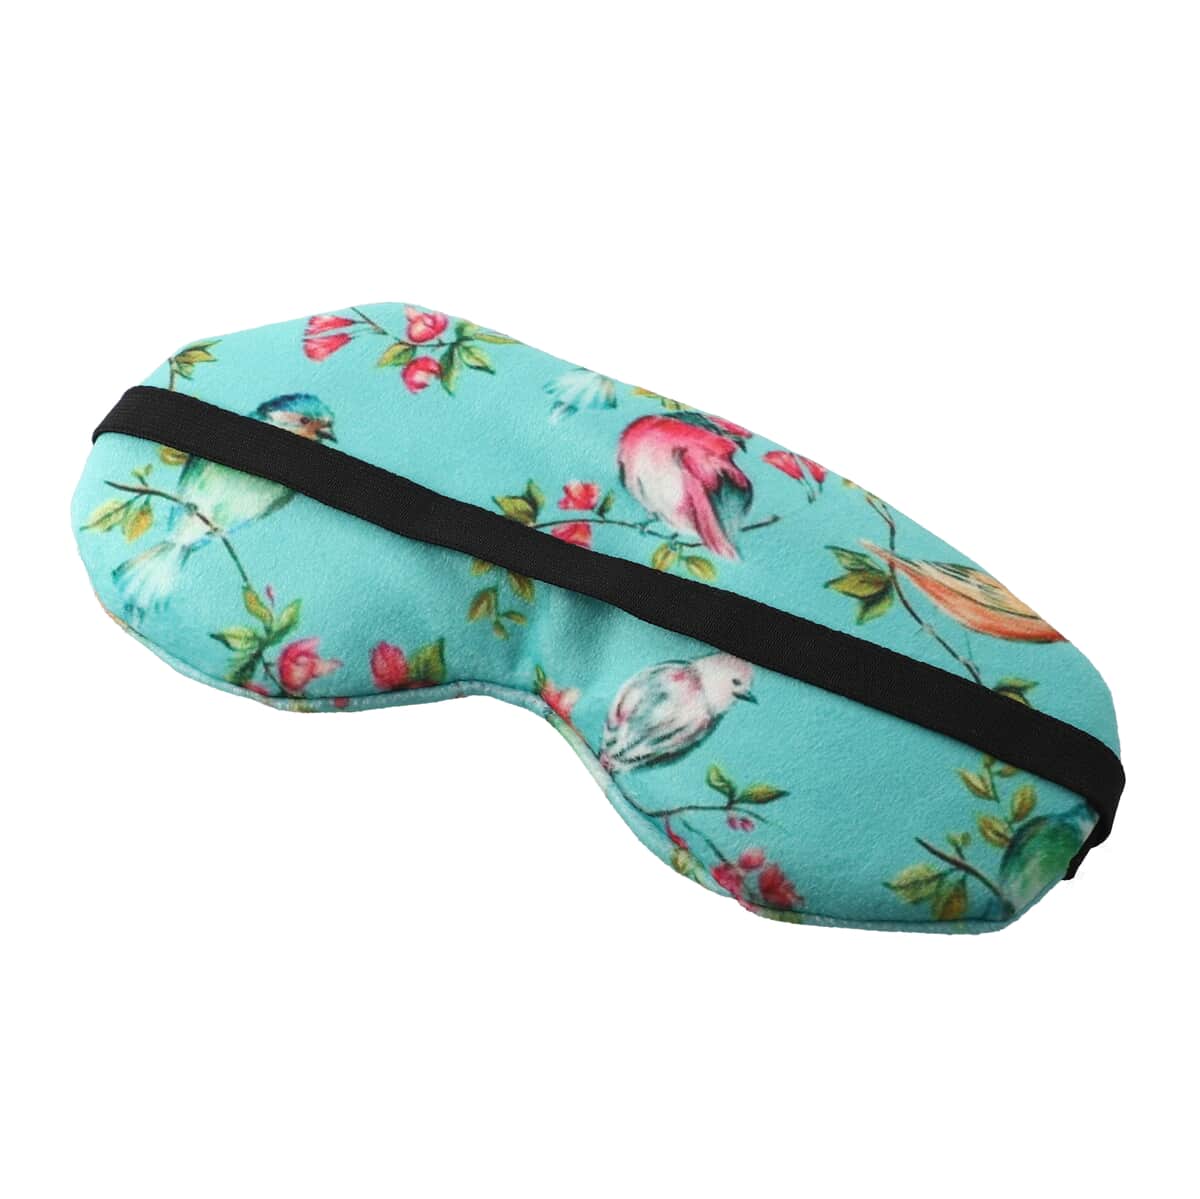 Multi Color Printed Cotton, Shungite Weighted Reusable Eye Mask with Shungite Gel Sleeve and Adjustable Strap image number 3